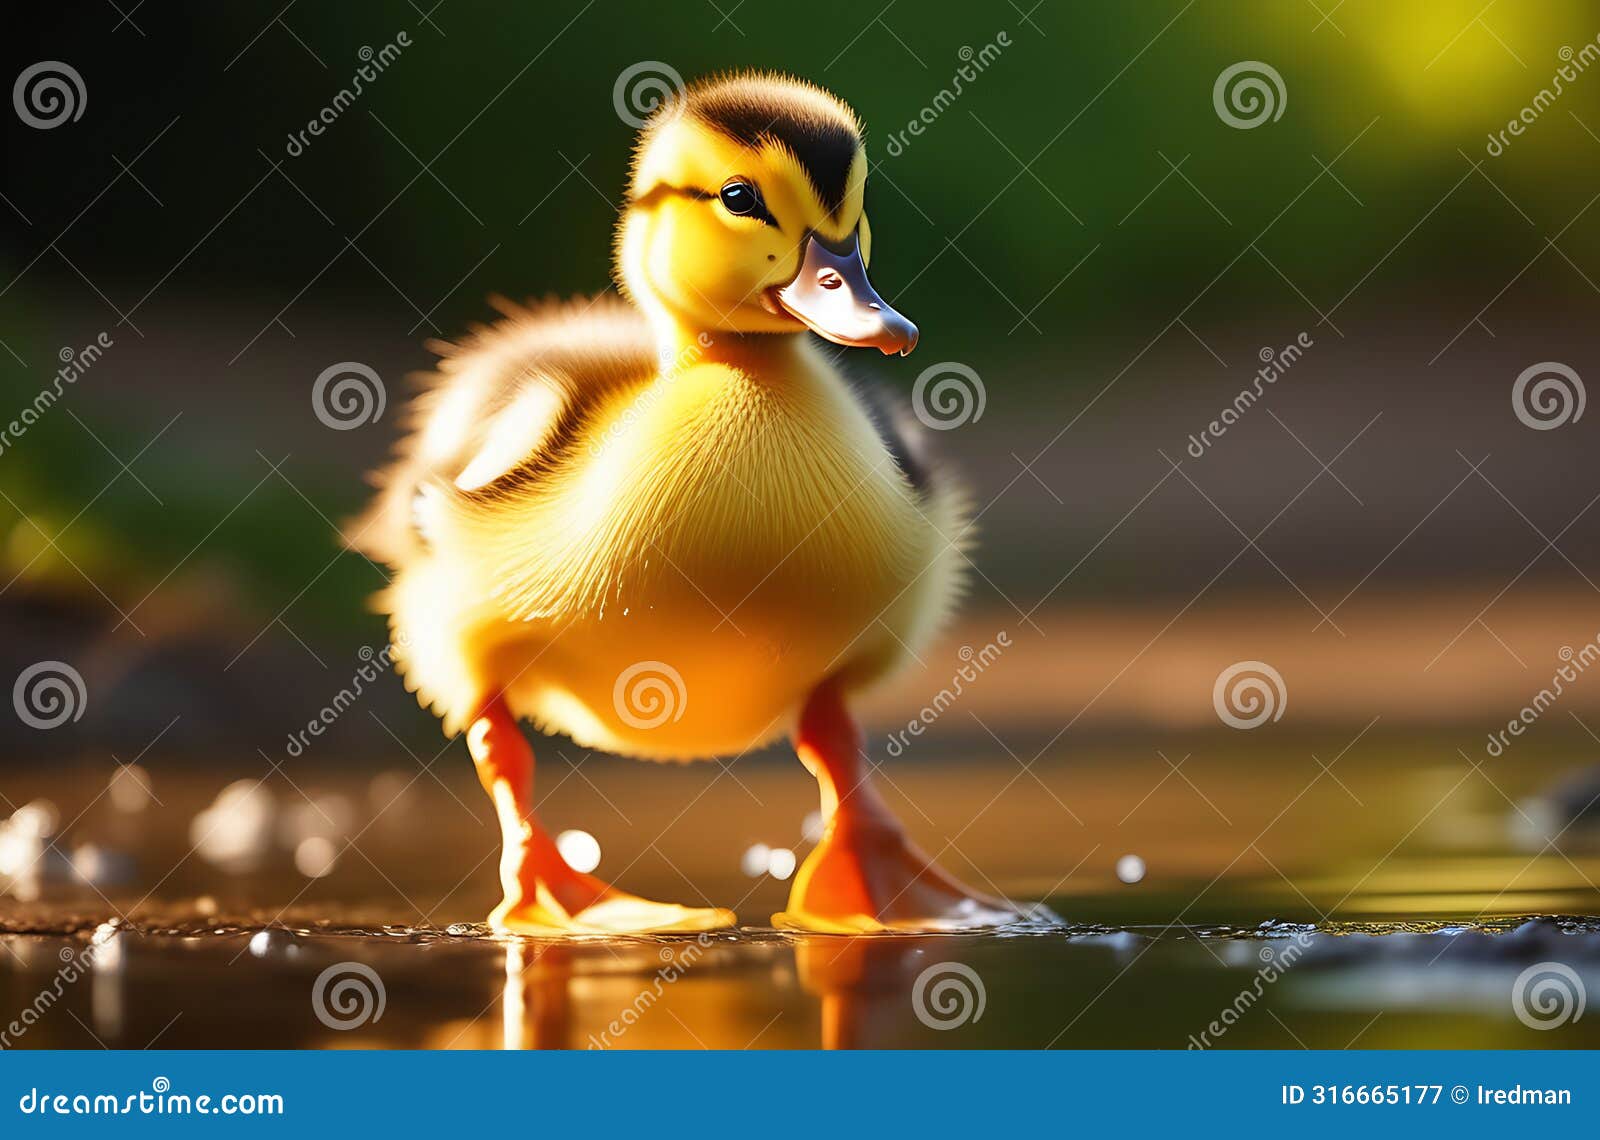 cute duckling walking through the puddles